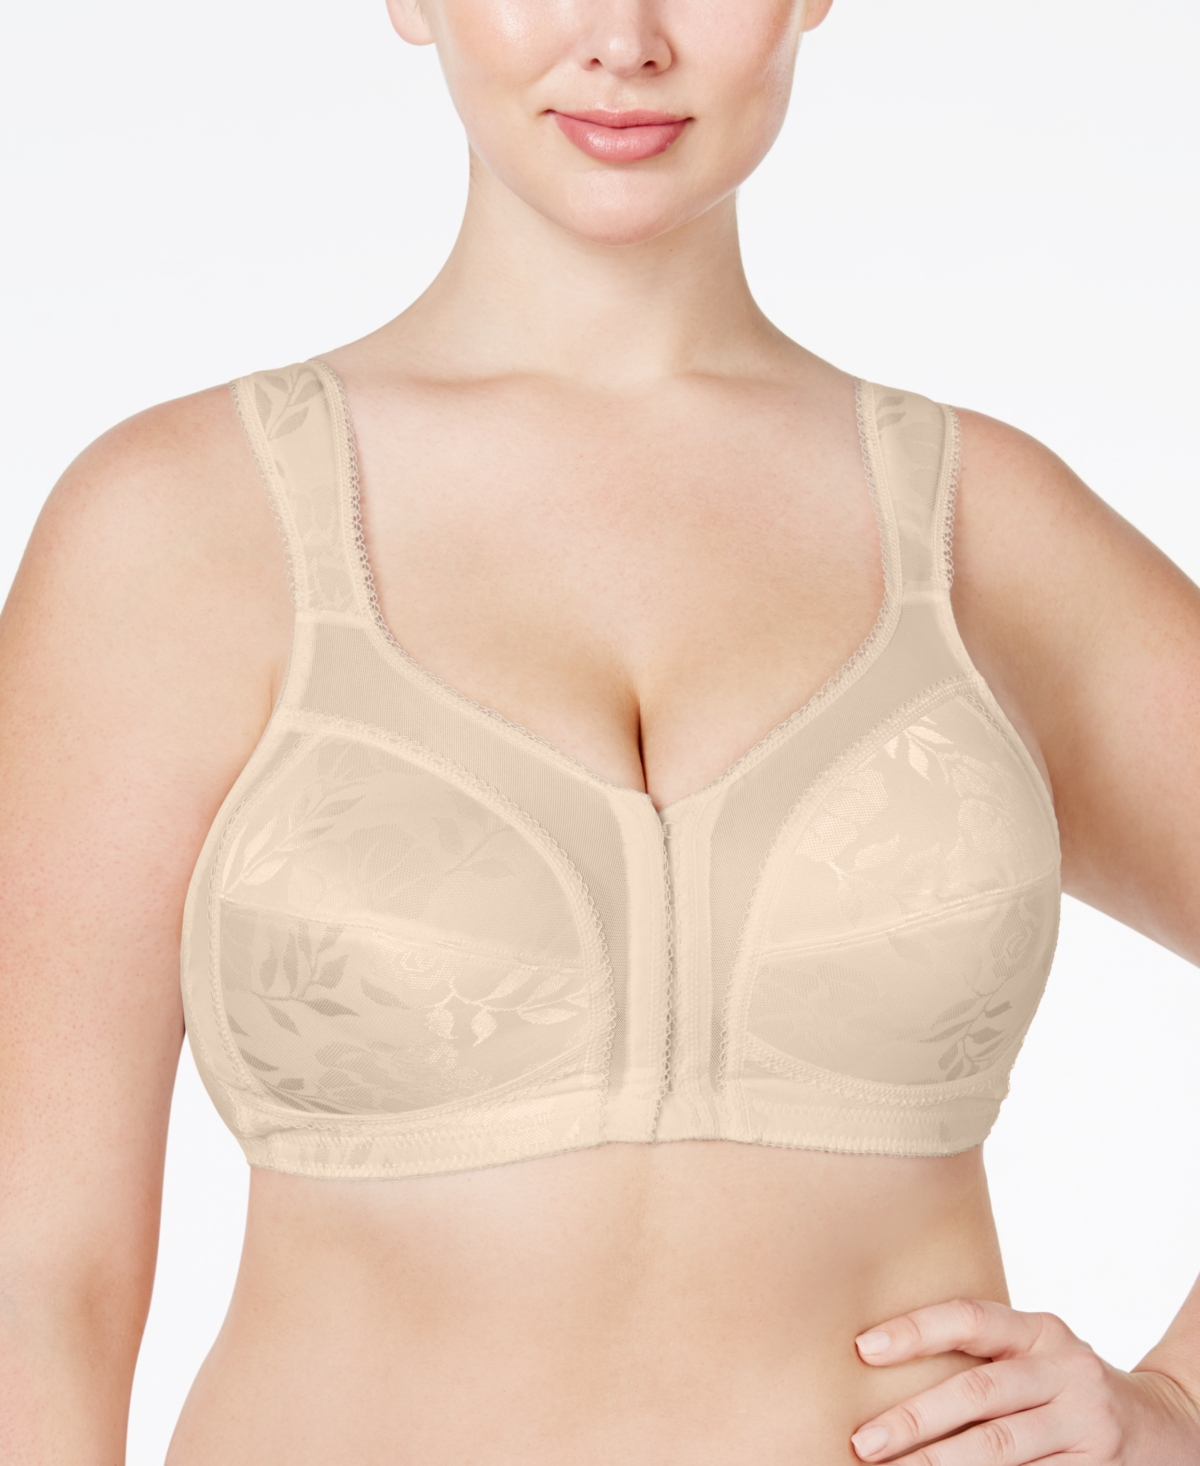 18 Hour Front Close Ultimate Shoulder Comfort Wireless Bra 4695, Online Only - White